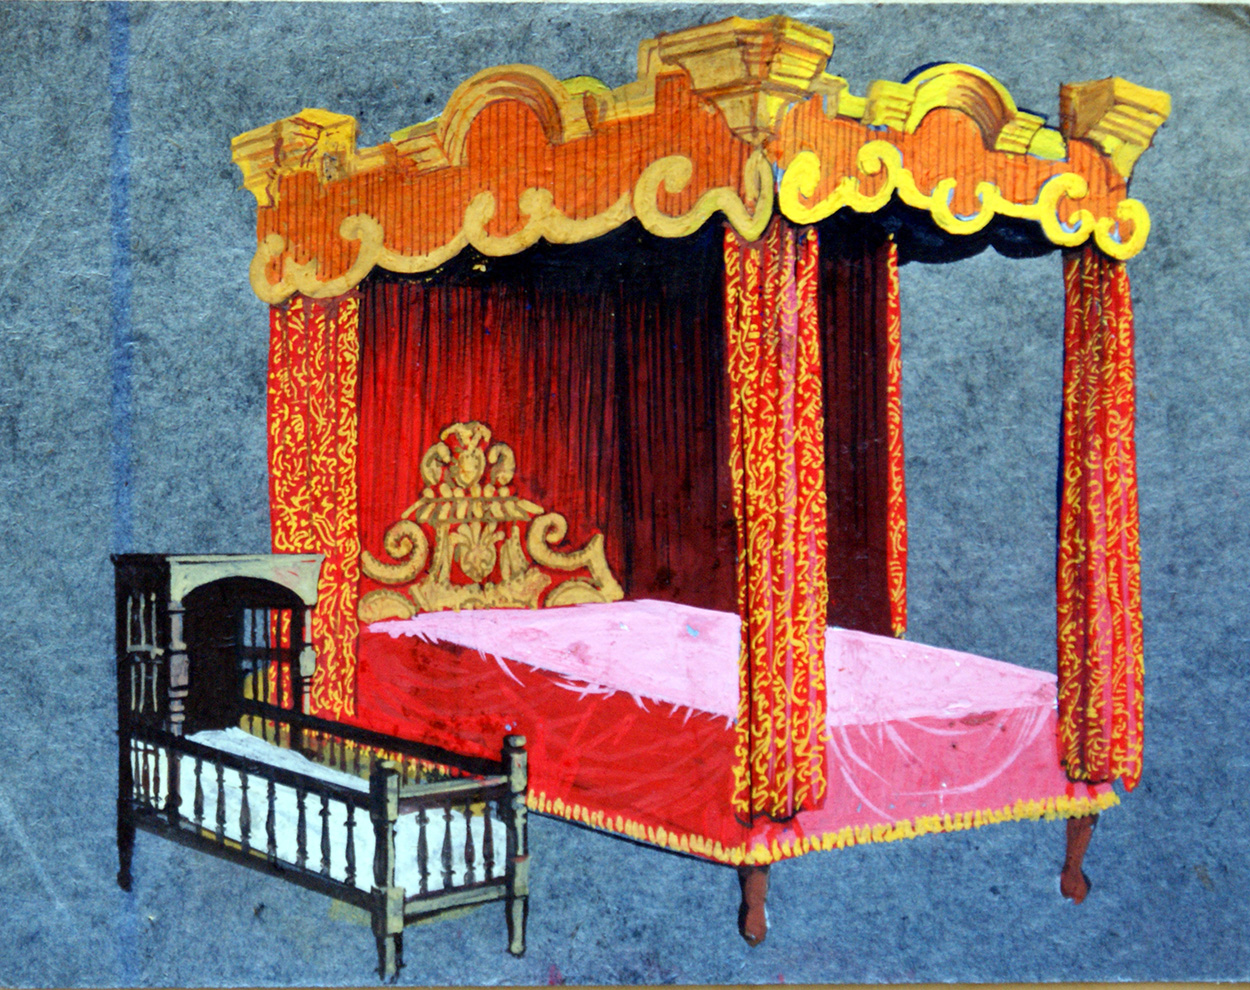 Royal Bed and Cot (Original) art by Jesus Blasco Art at The Illustration Art Gallery